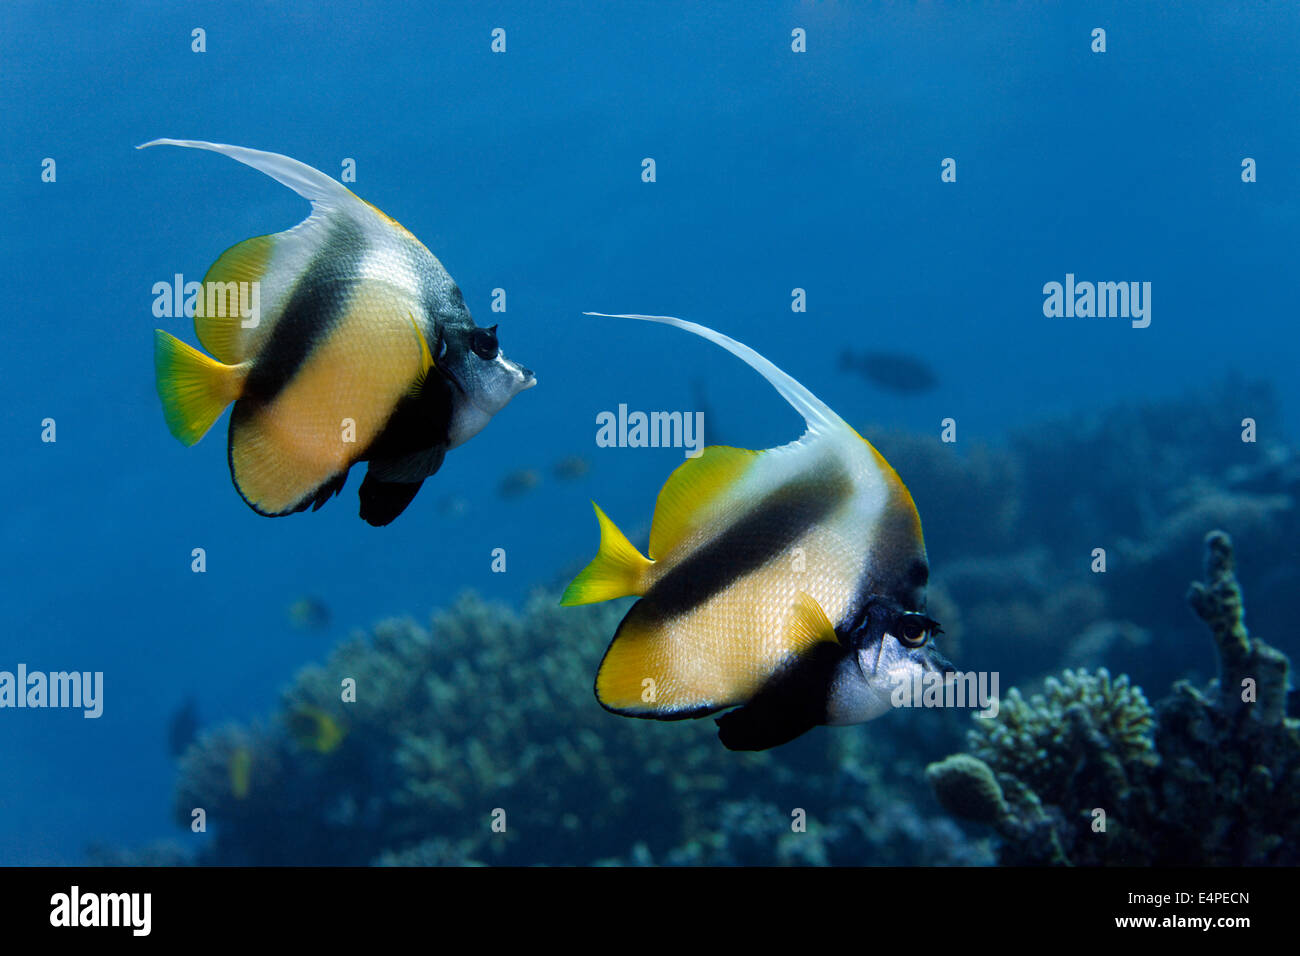 Red Sea Bannerfish (Heniochus intermedius) at a coral reef, endemic species, Red Sea, Egypt Stock Photo